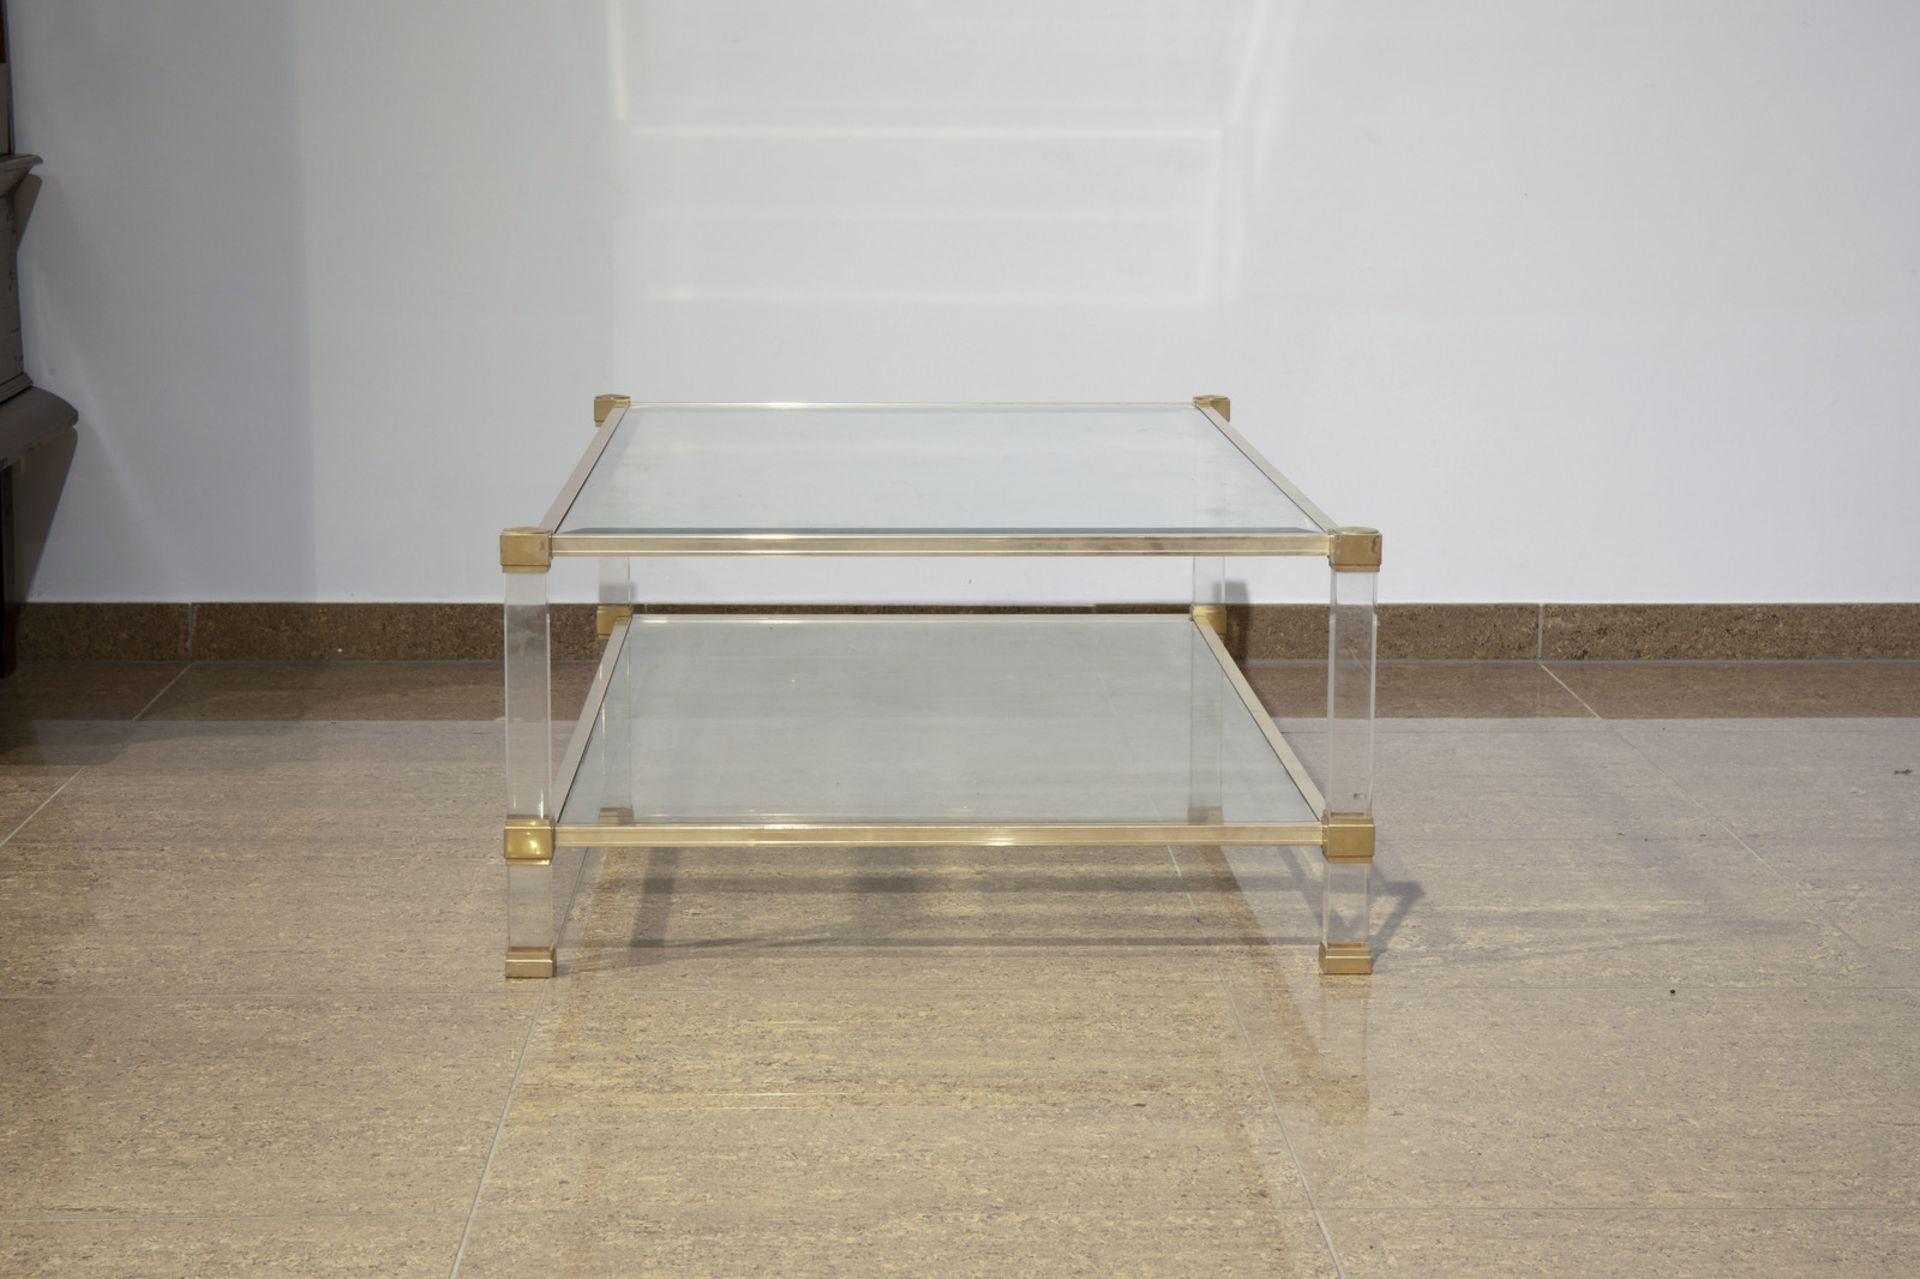 A Pierre Vandel brass and bevelled glass coffee table with lucite legs, France, 1970's - Image 6 of 7